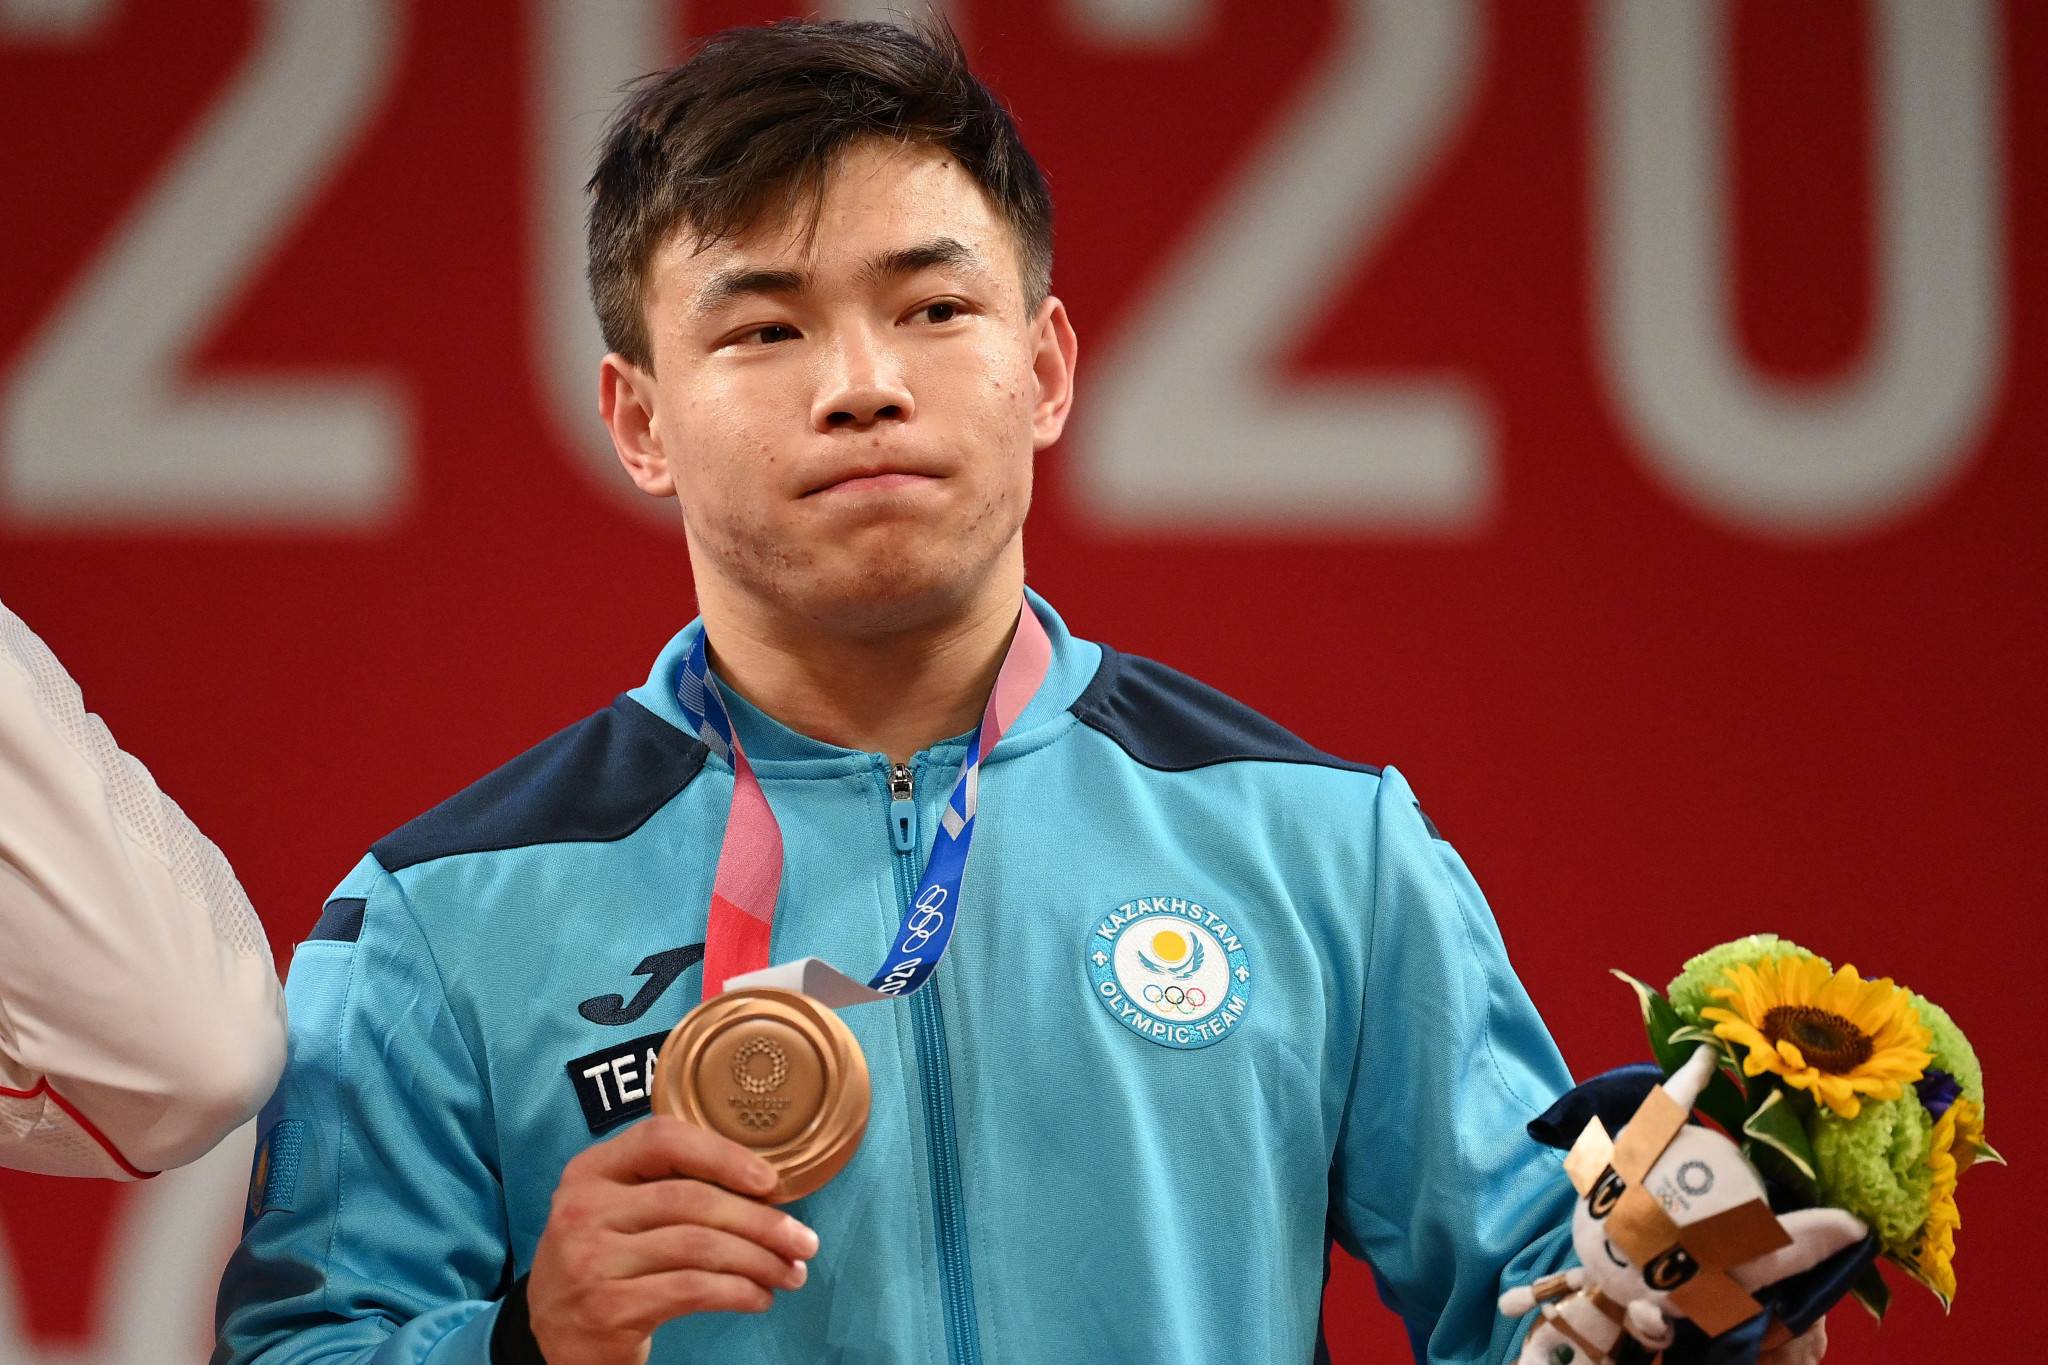 Igor Son has also tested positive for a banned substance since Tokyo 2020 ©Getty Images